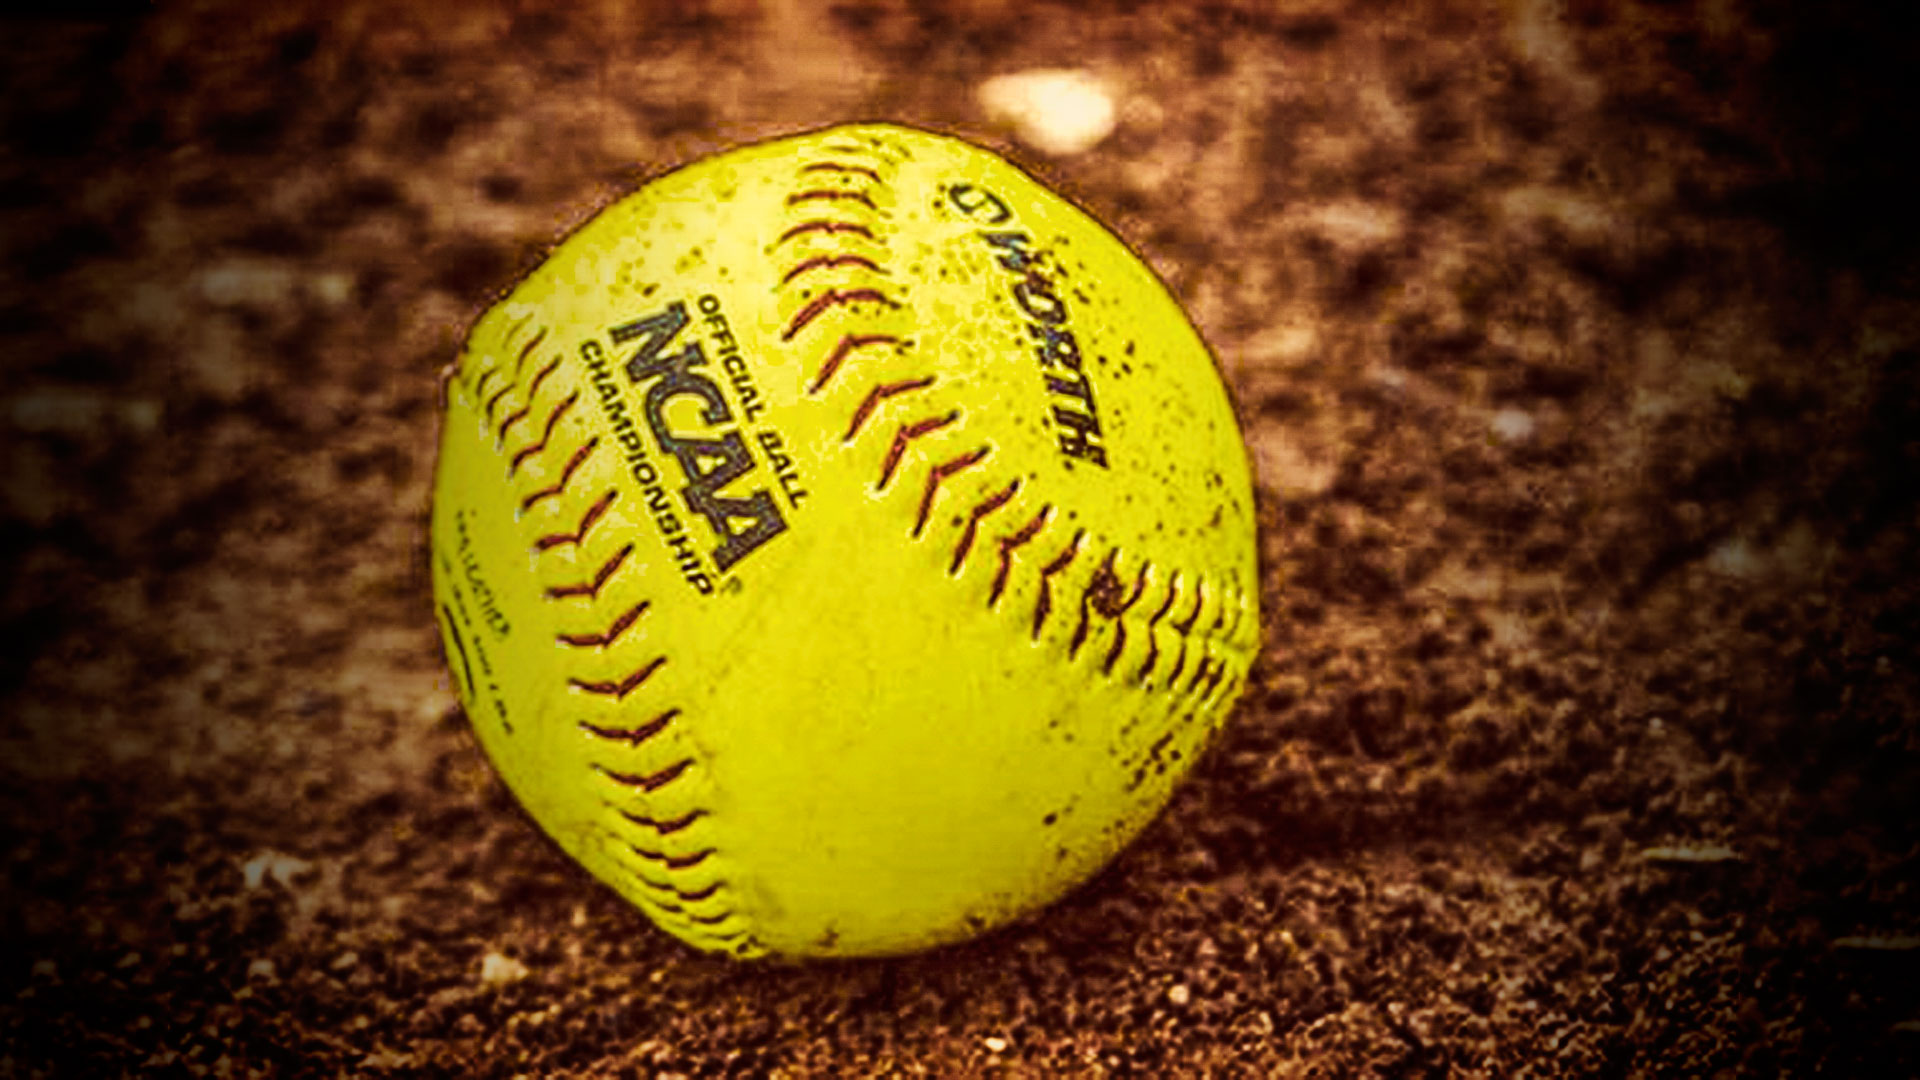 28430 Softball Background Images Stock Photos  Vectors  Shutterstock